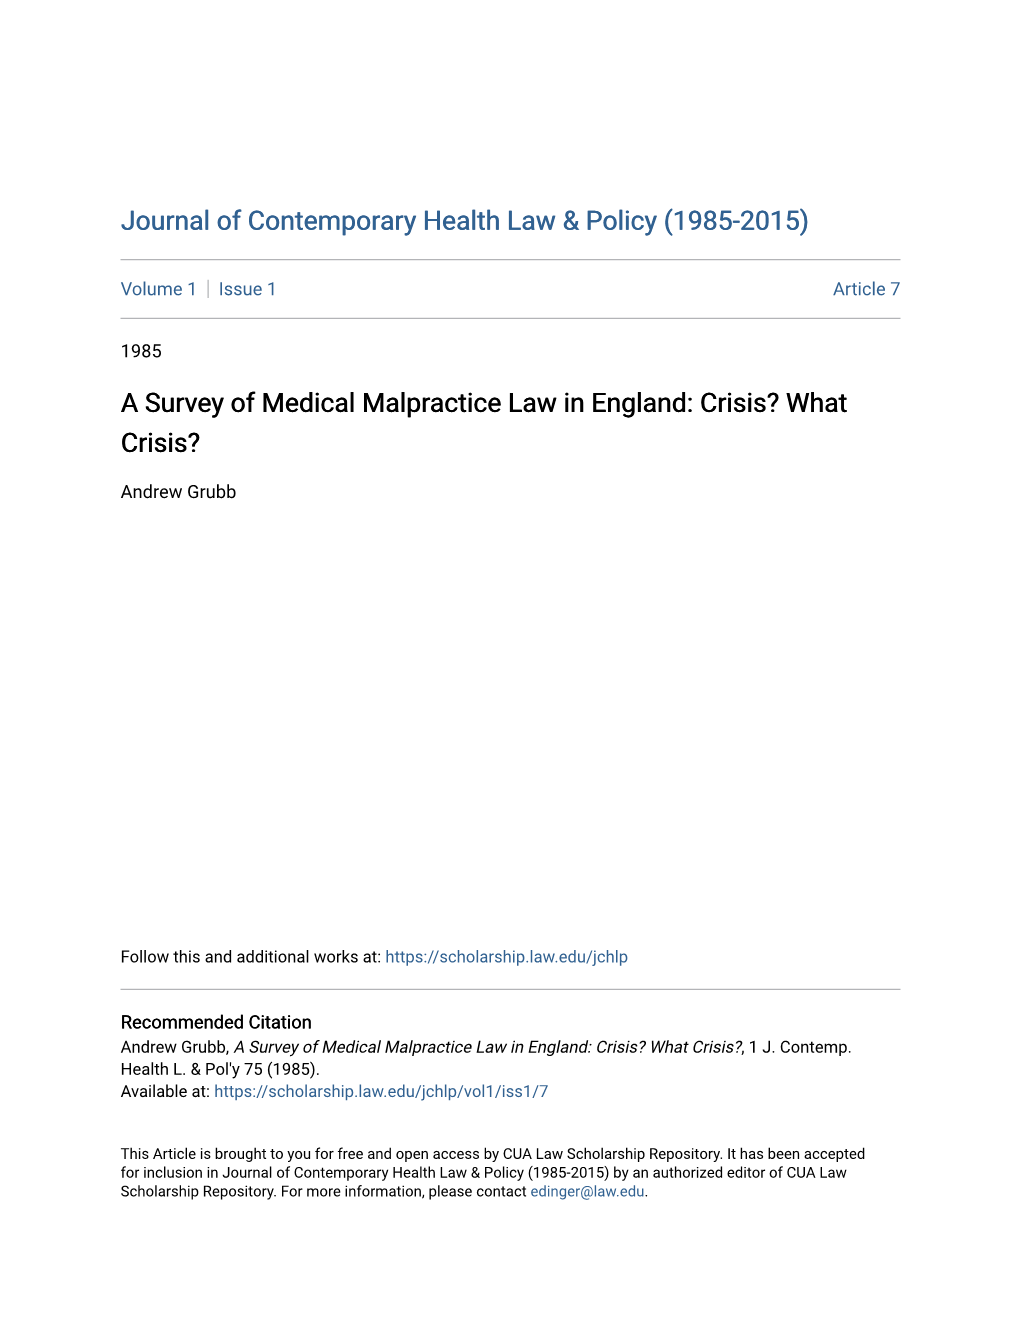 A Survey of Medical Malpractice Law in England: Crisis? What Crisis?